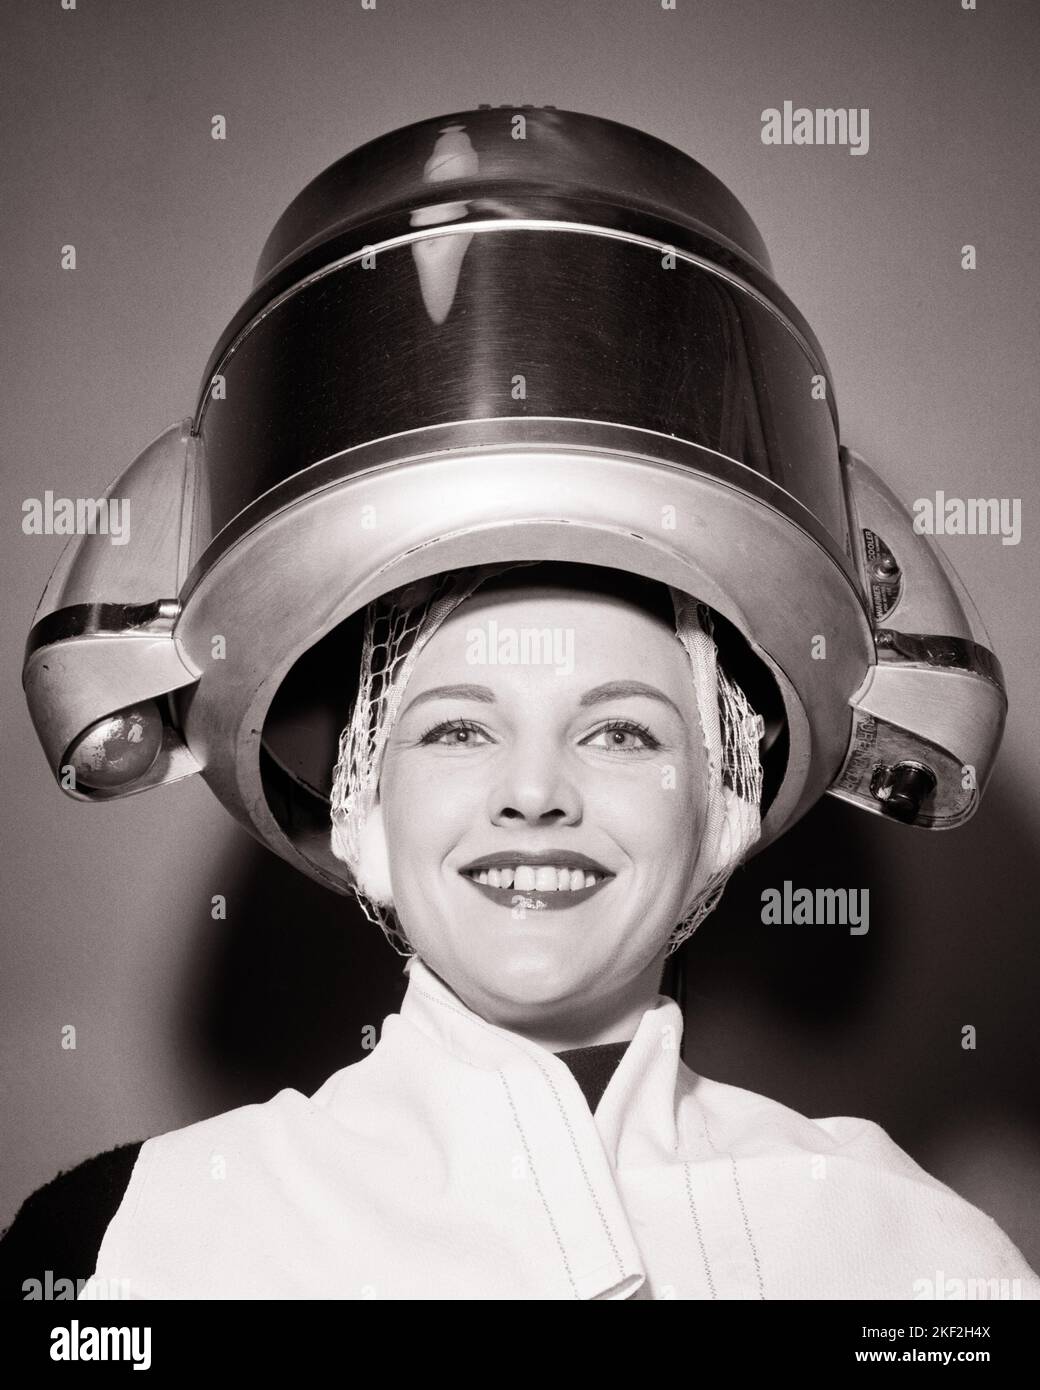 1950s WOMAN UNDER SALON HAIR DRYER WITH TOWEL ON SHOULDERS AND HAIR NET LOOKING AT CAMERA SMILING - s8931 DEB001 HARS HOOD PLEASED JOY LIFESTYLE SATISFACTION FEMALES STUDIO SHOT HEAT COPY SPACE LADIES PERSONS EXPRESSIONS B&W EYE CONTACT HUMOROUS HAPPINESS HEAD AND SHOULDERS CHEERFUL DRYING HAIRDRYER AND EXCITEMENT HAIRSTYLE MACHINES COMICAL SMILES DRYERS BEAUTY PARLOR COMEDY JOYFUL STYLISH DEB001 HAIR NET HAIRDO YOUNG ADULT WOMAN BLACK AND WHITE CAUCASIAN ETHNICITY OLD FASHIONED Stock Photo